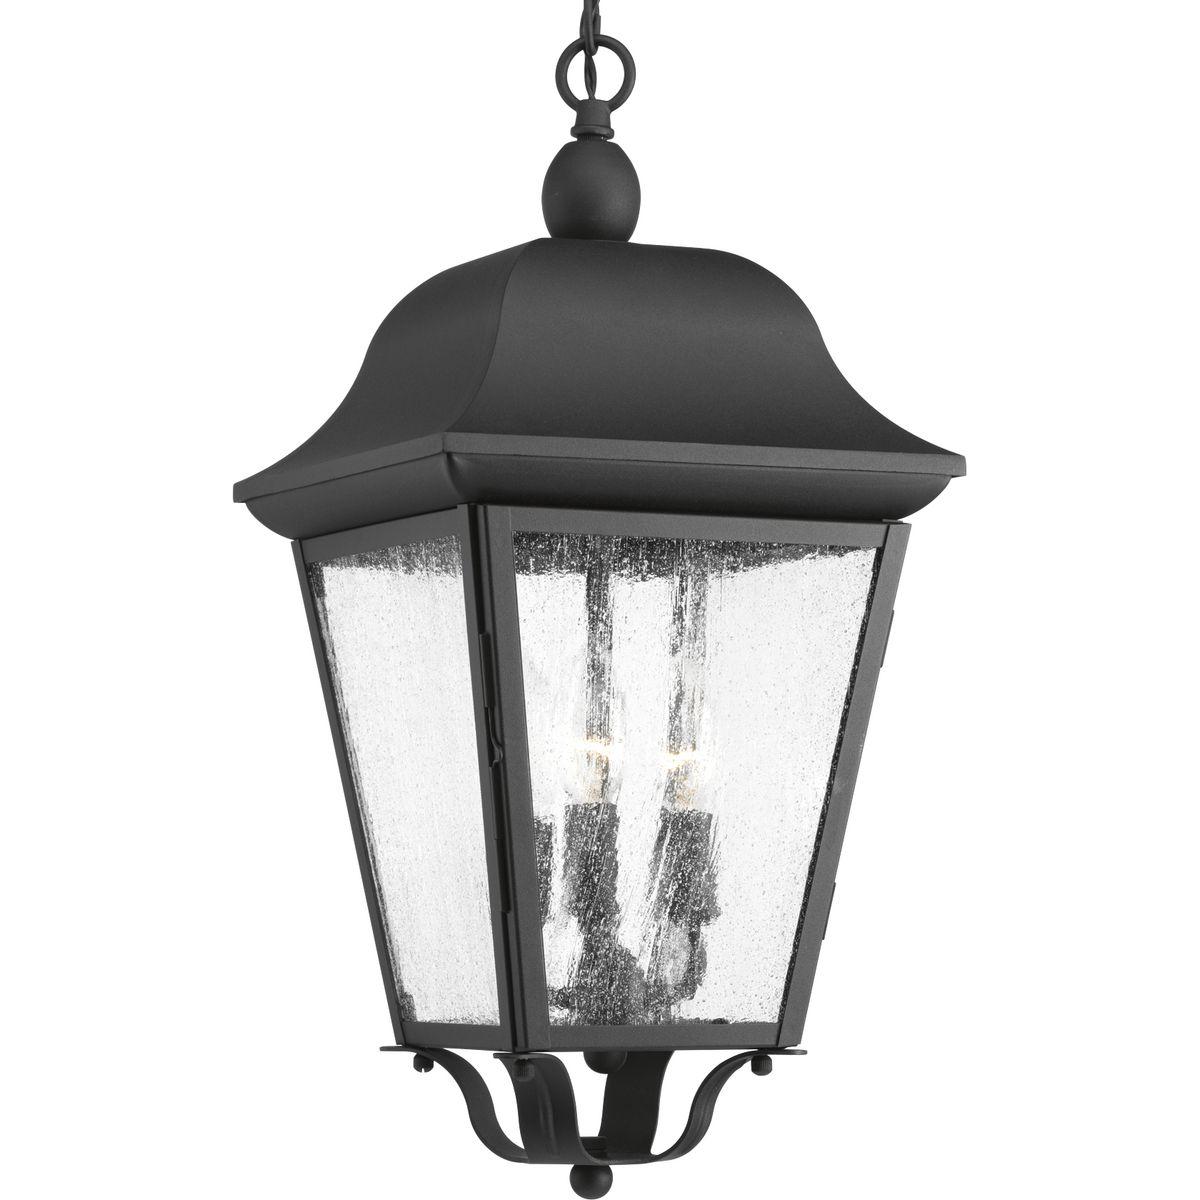 Hubbell P550001-031 Enjoy the updated classic styling for a variety of outdoor applications in the Kiawah collection. The three-light hanging lantern features seeded glass panels and traditional detailing combine to create a soft and updated lantern design. Hinged door for e